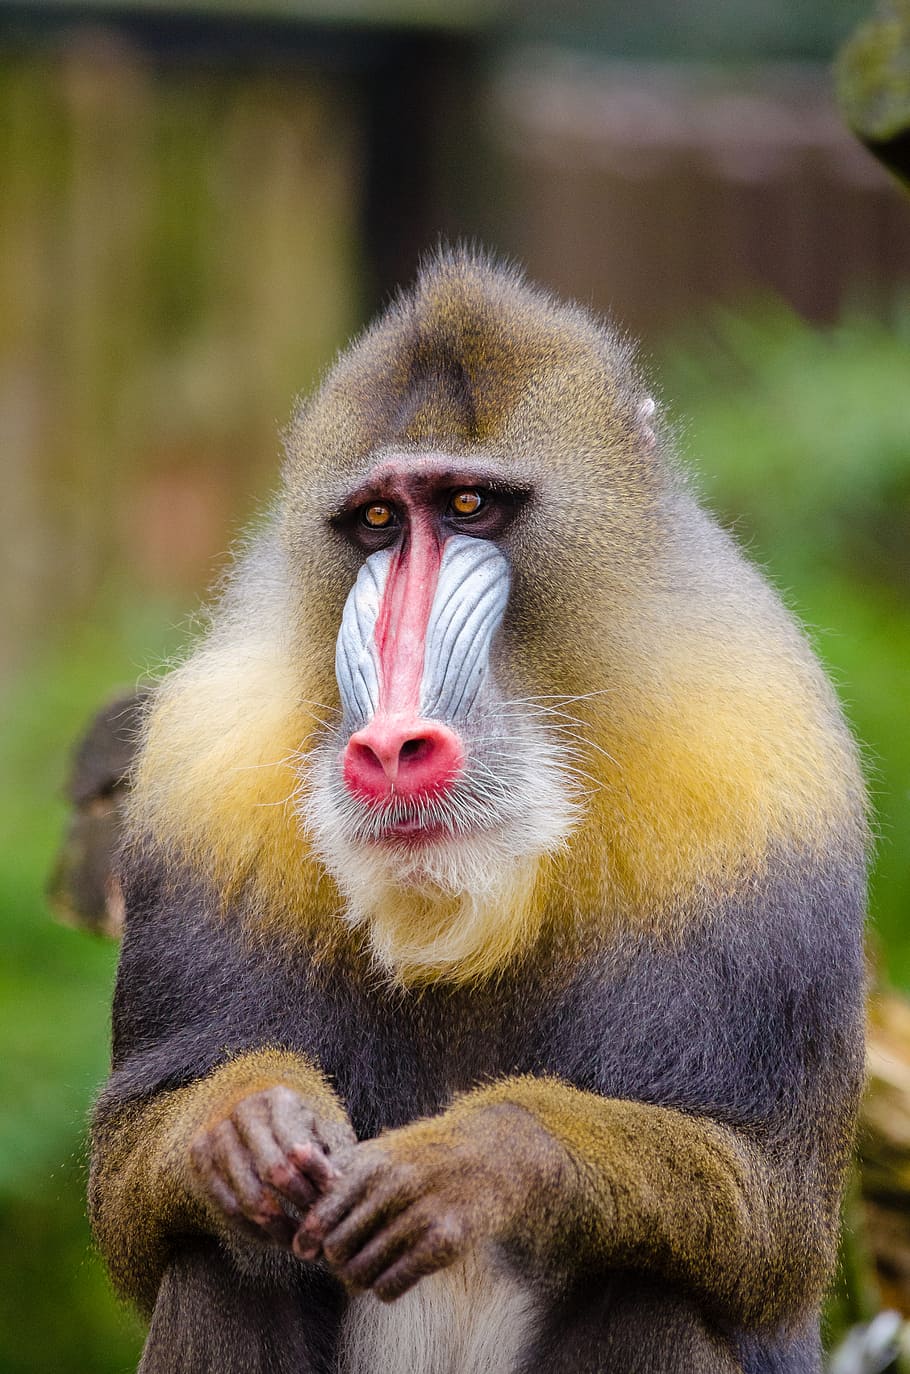 baboon, primate, animal wildlife, animals in the wild, mammal, one animal, vertebrate, focus on foreground, day, close-up